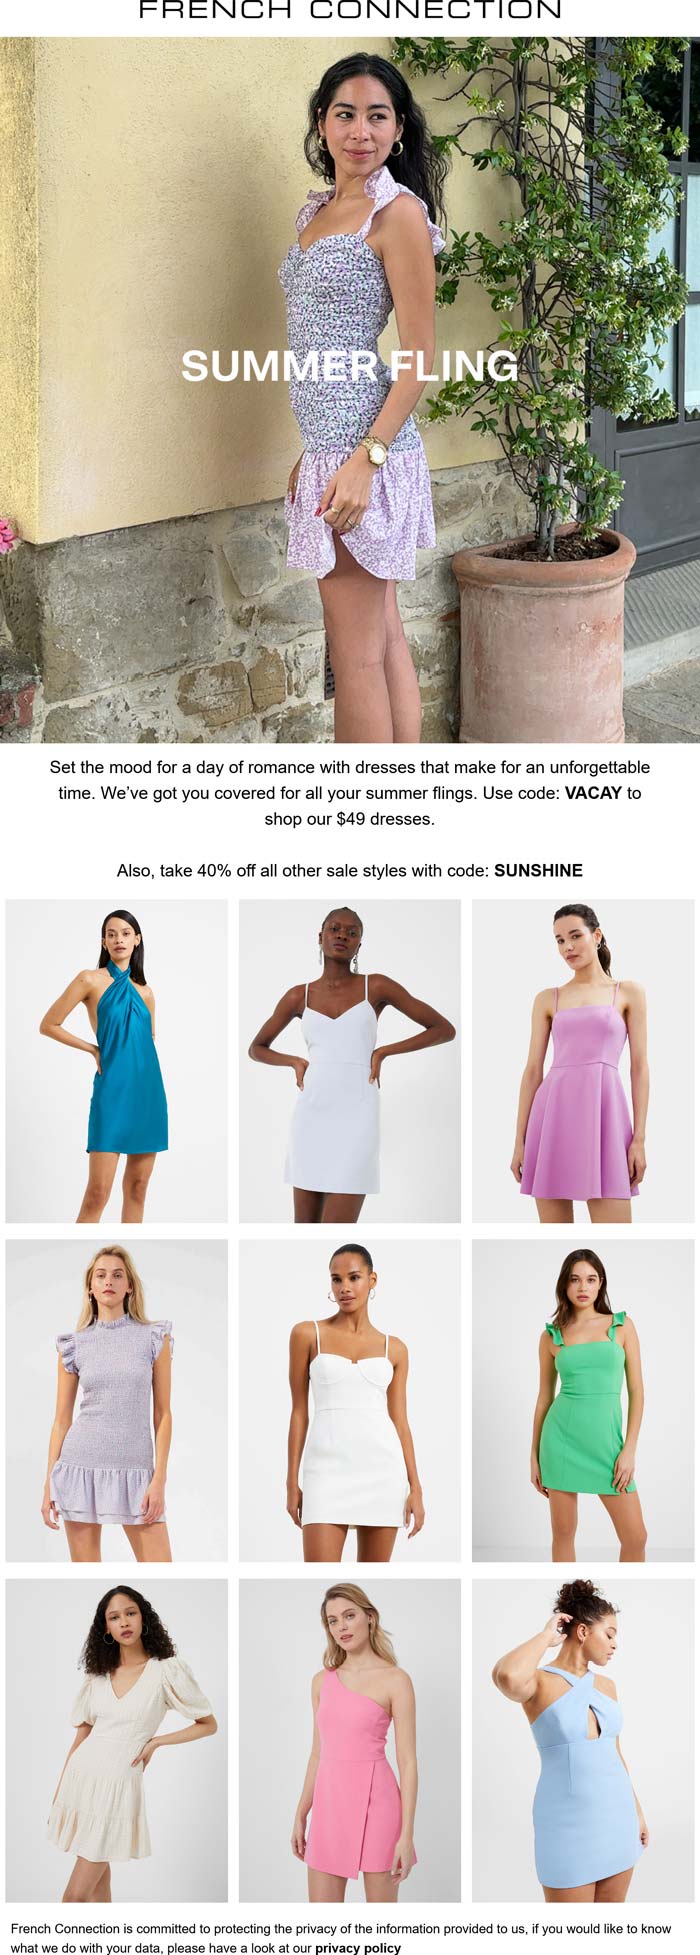 French Connection stores Coupon  $49 dresses + 40% off at French Connection via promo code SUNSHINE #frenchconnection 